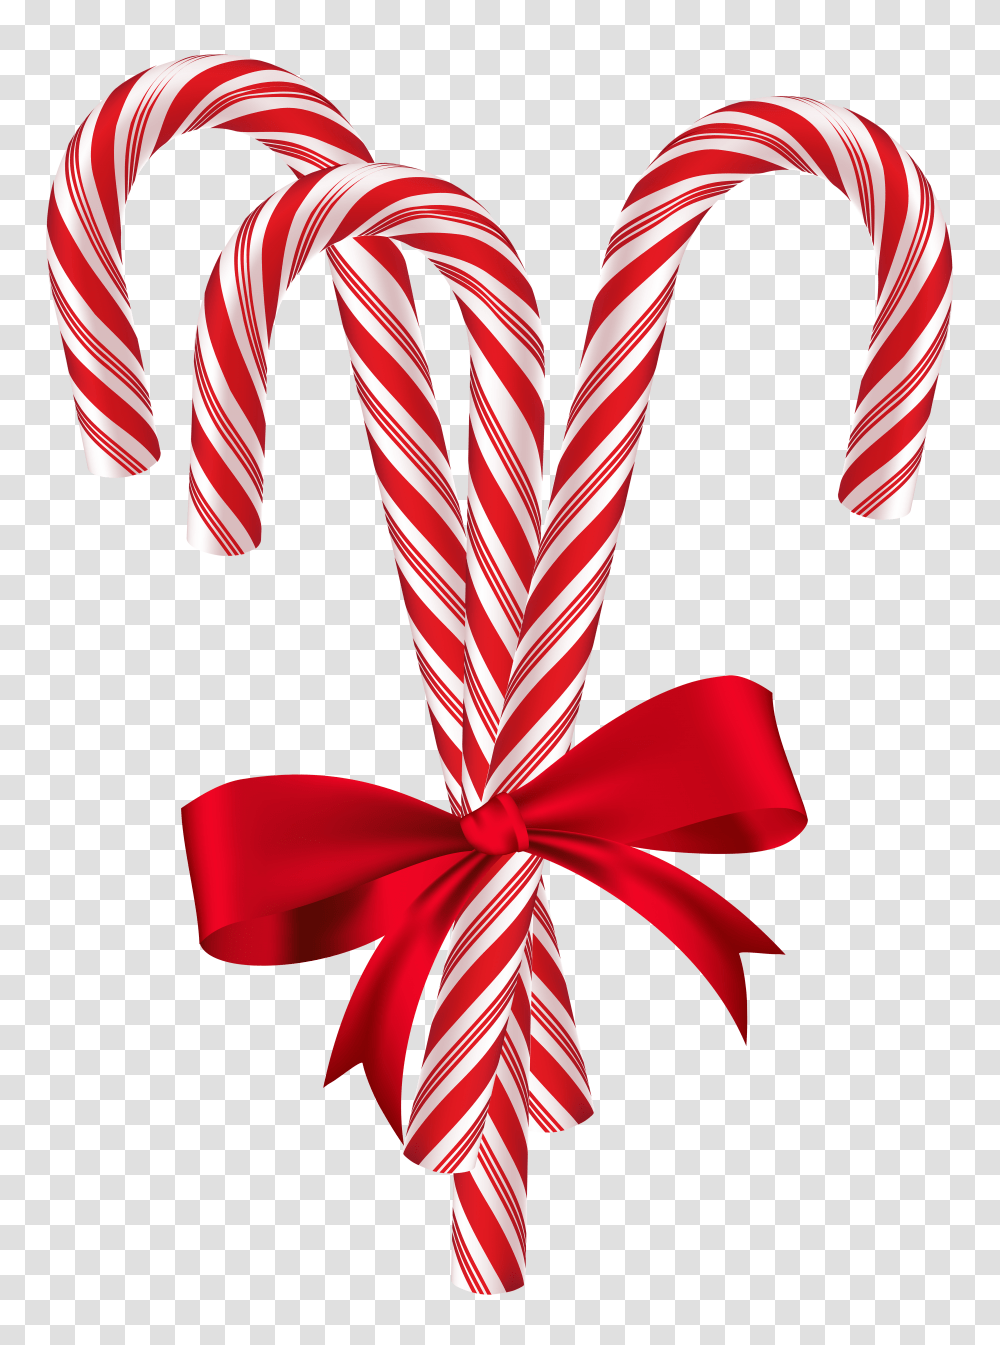 Download Candy Cane Image With Christmas Candy Cane Transparent Png